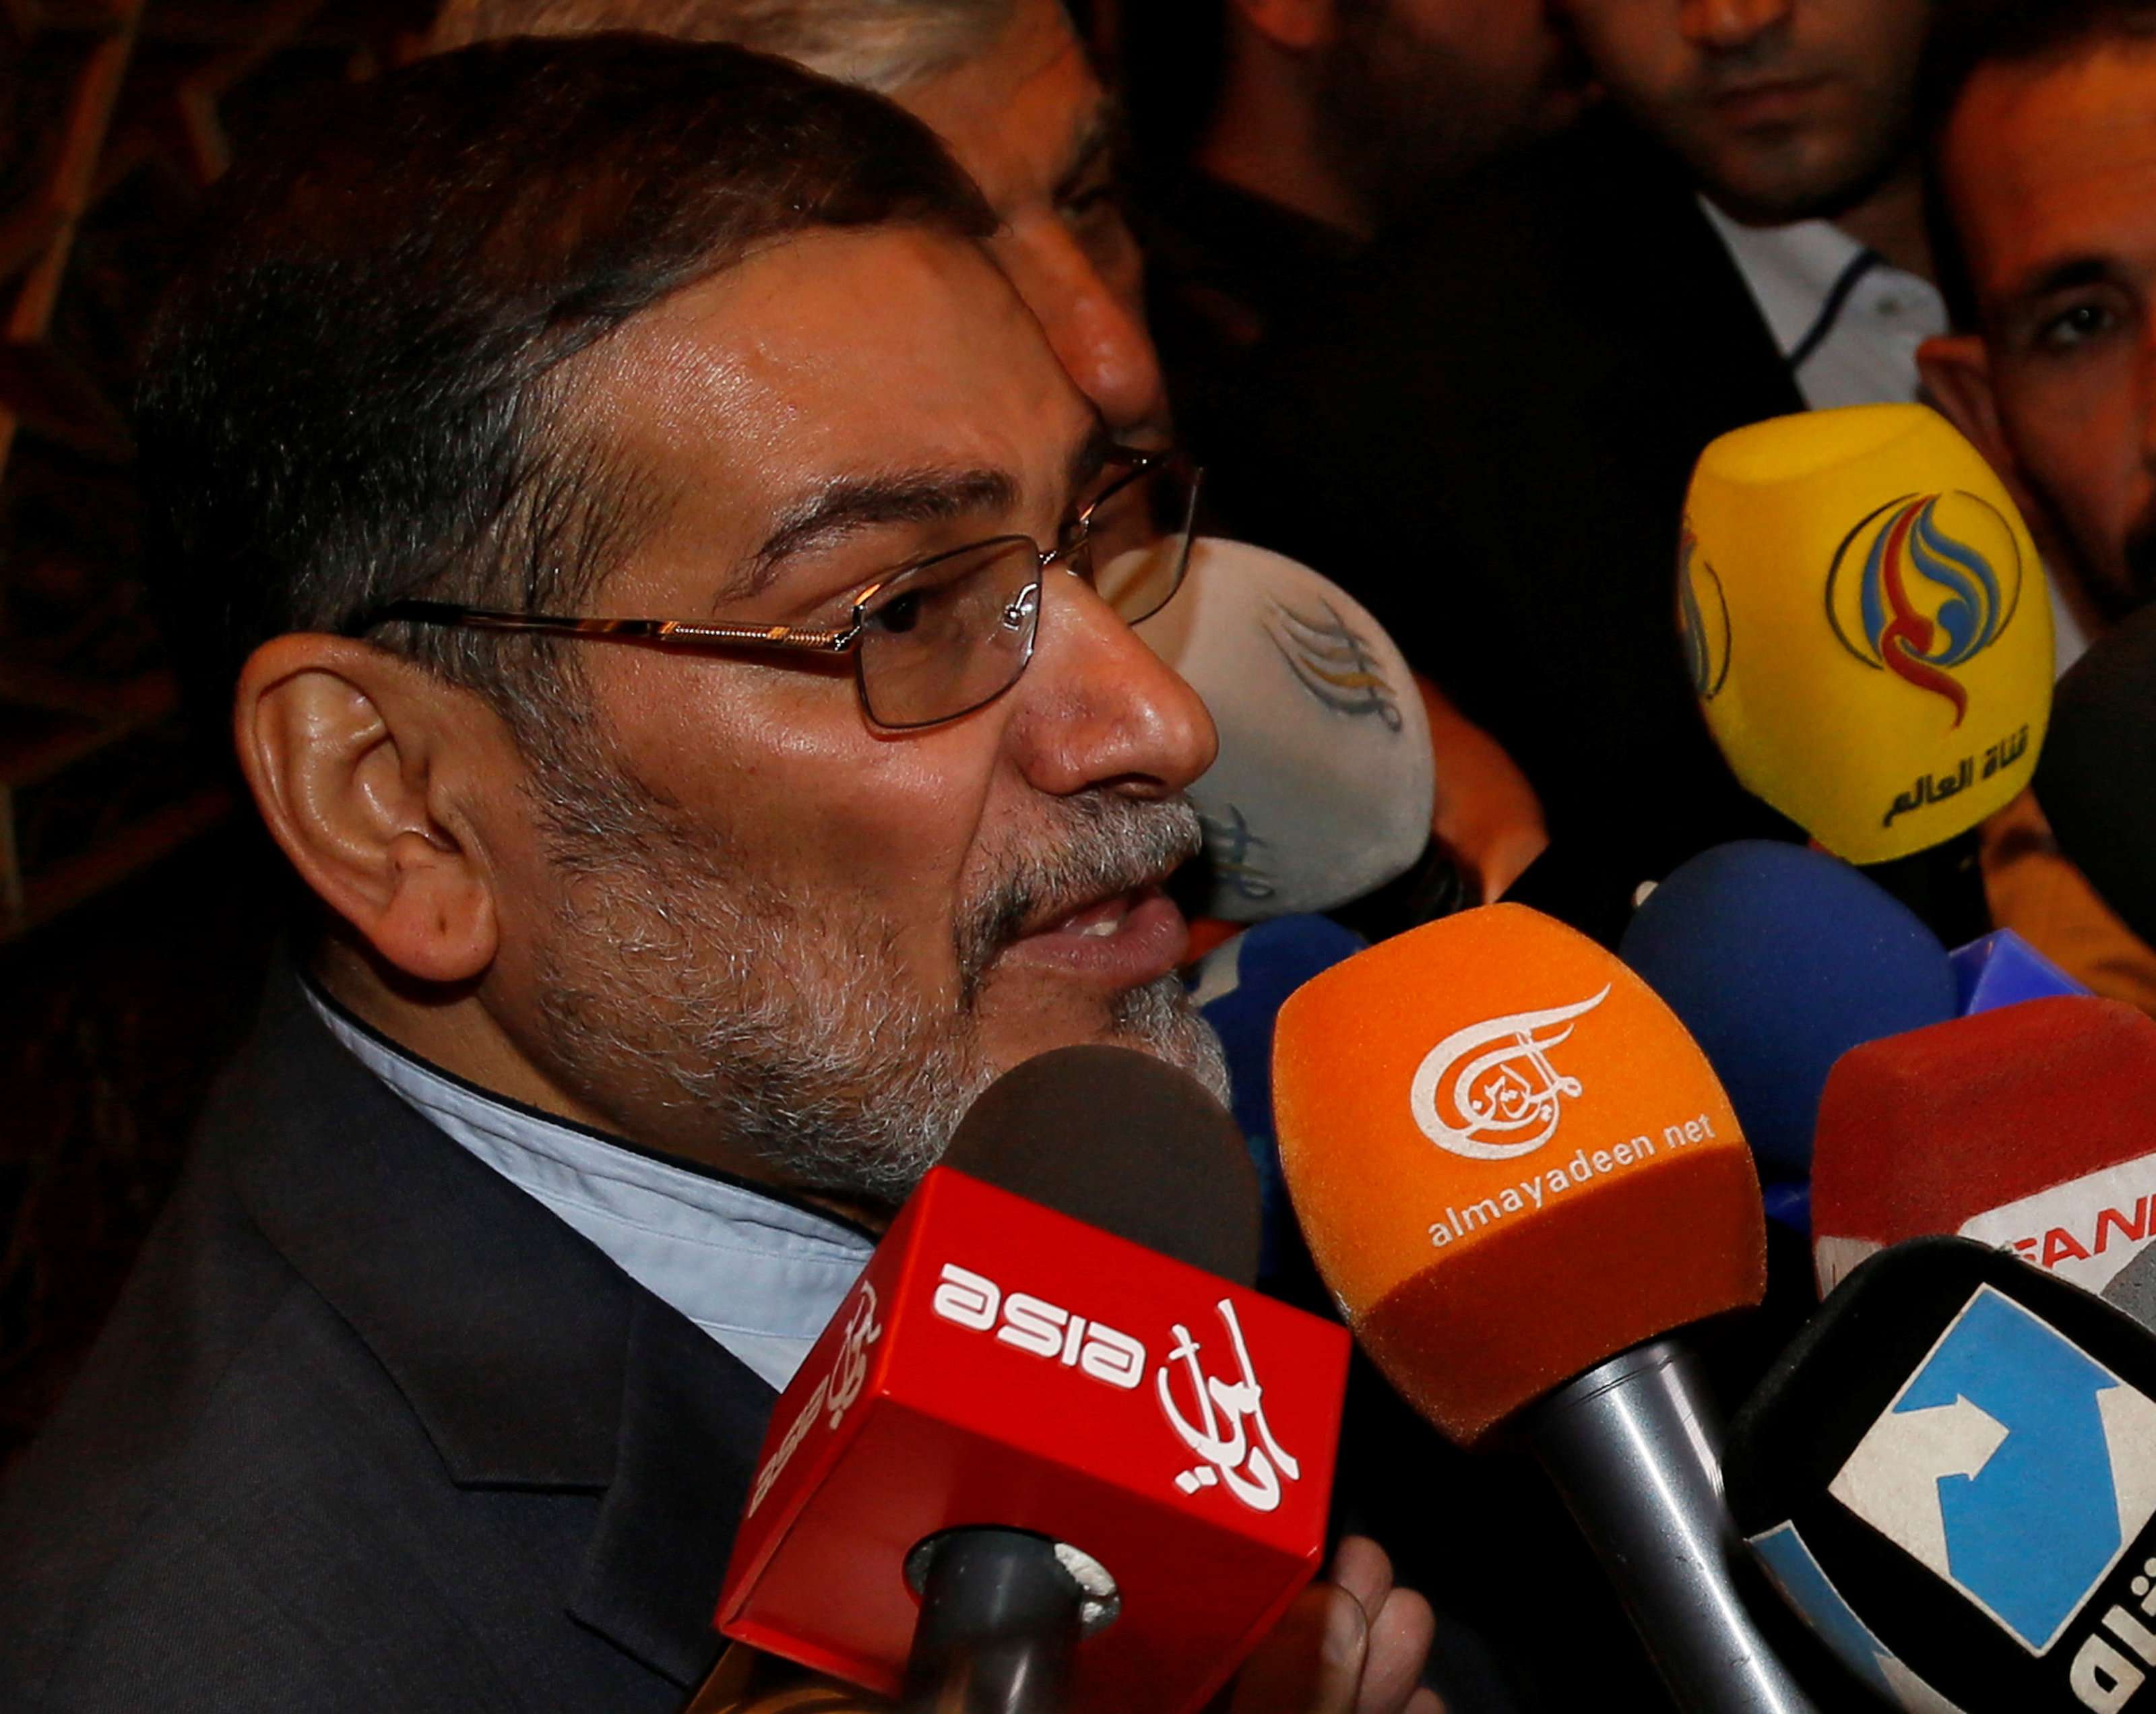 Admiral Ali Shamkhani, Iran's Supreme National Security Council Director, speaks to the media after his arrival at Damascus airport, September 30, 2014.